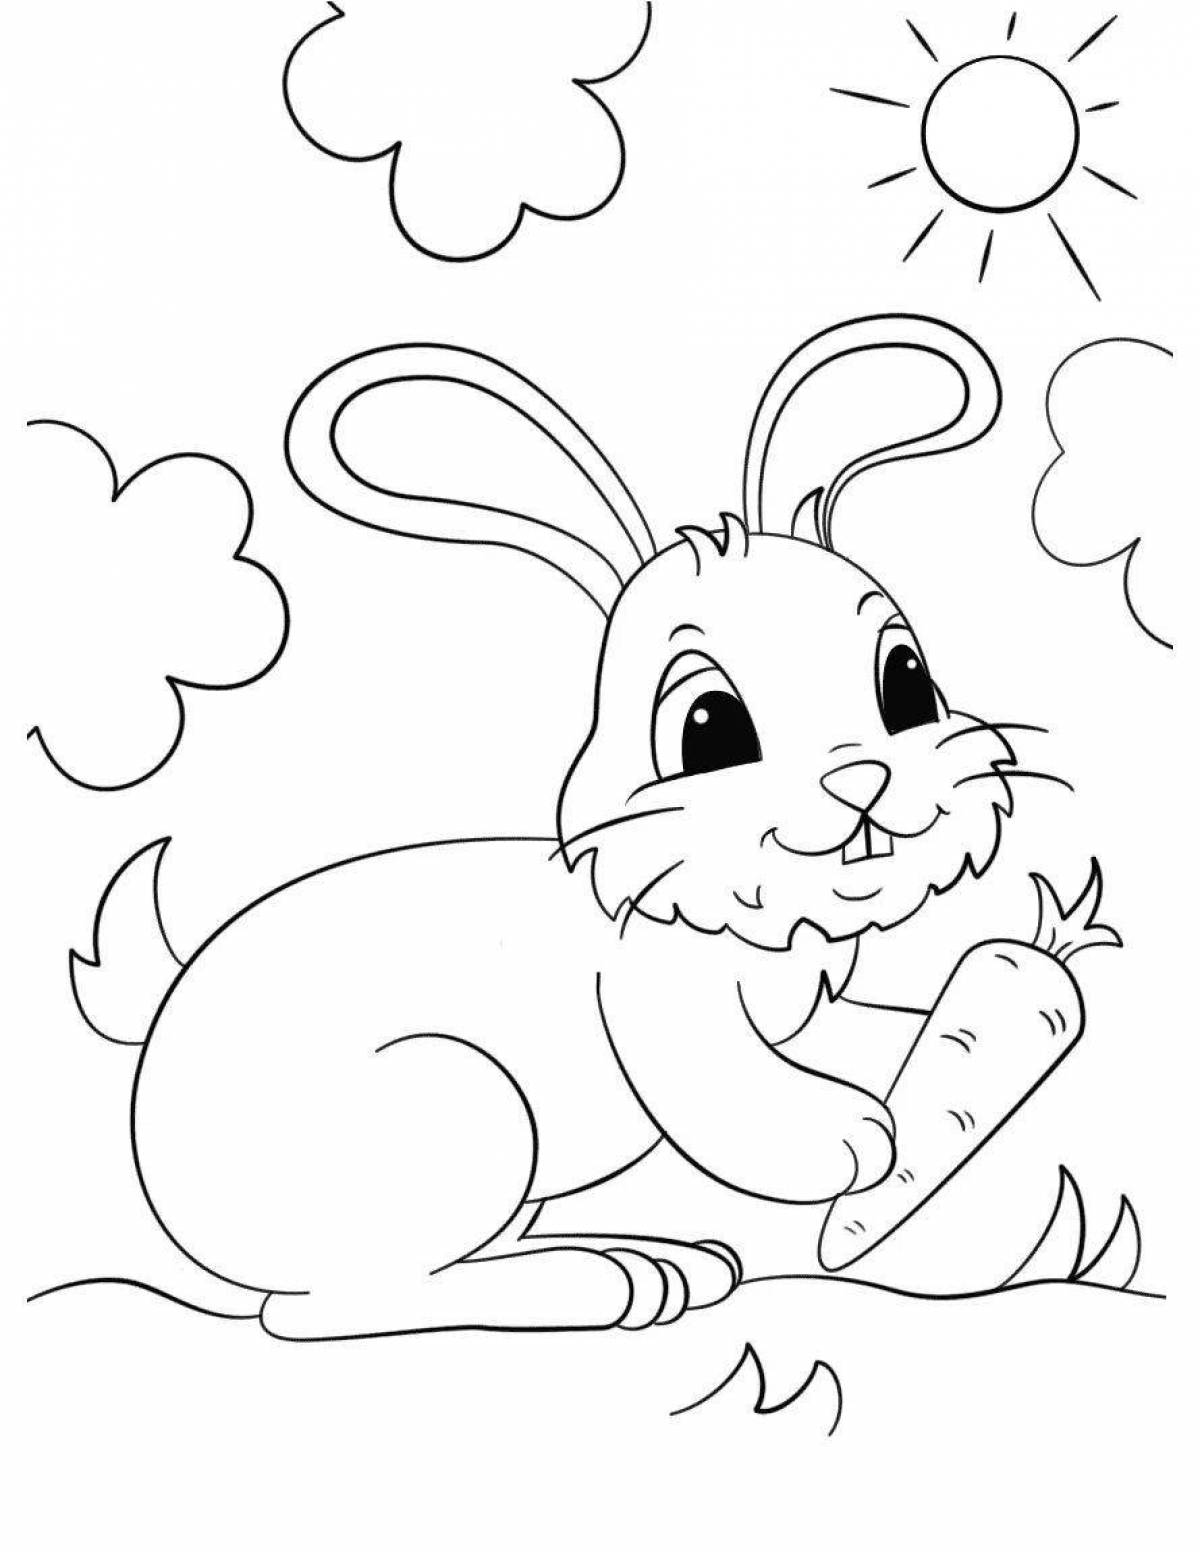 Cozy coloring rabbit with carrots